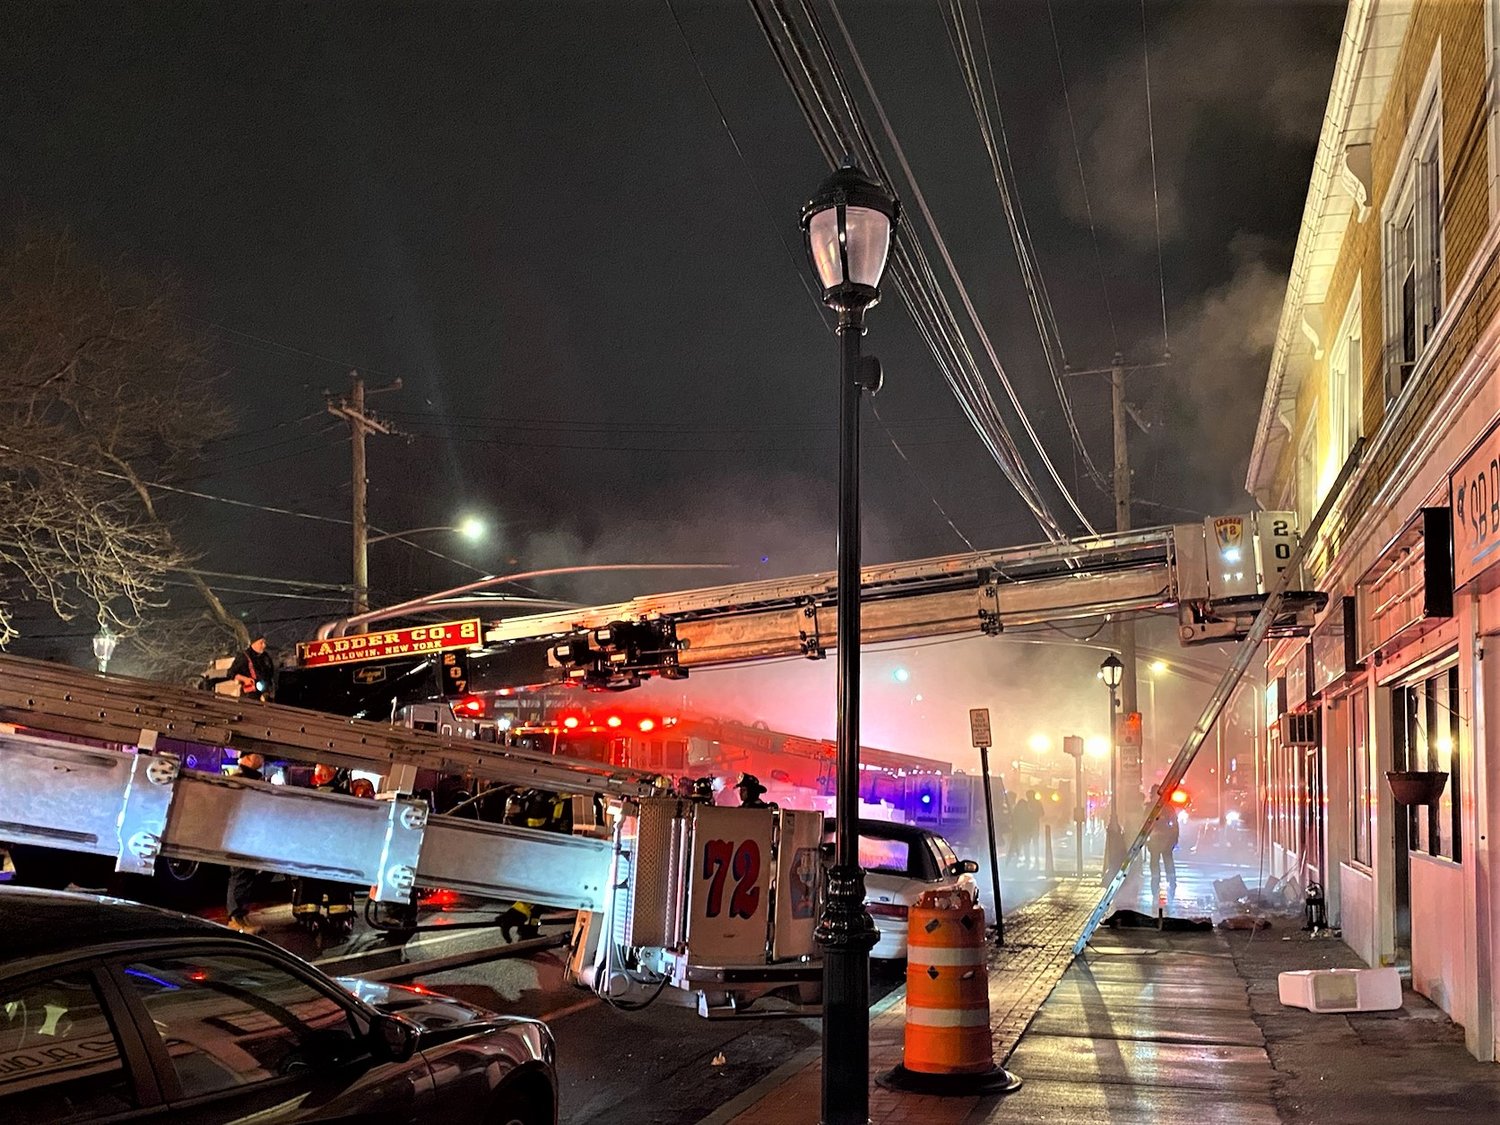 The Baldwin Fire Department and Nassau County’s Arson and Bomb Squad stopped a commercial fire in the second-floor apartments and safely removed all second-floor residents in the building with no injuries or incidents.